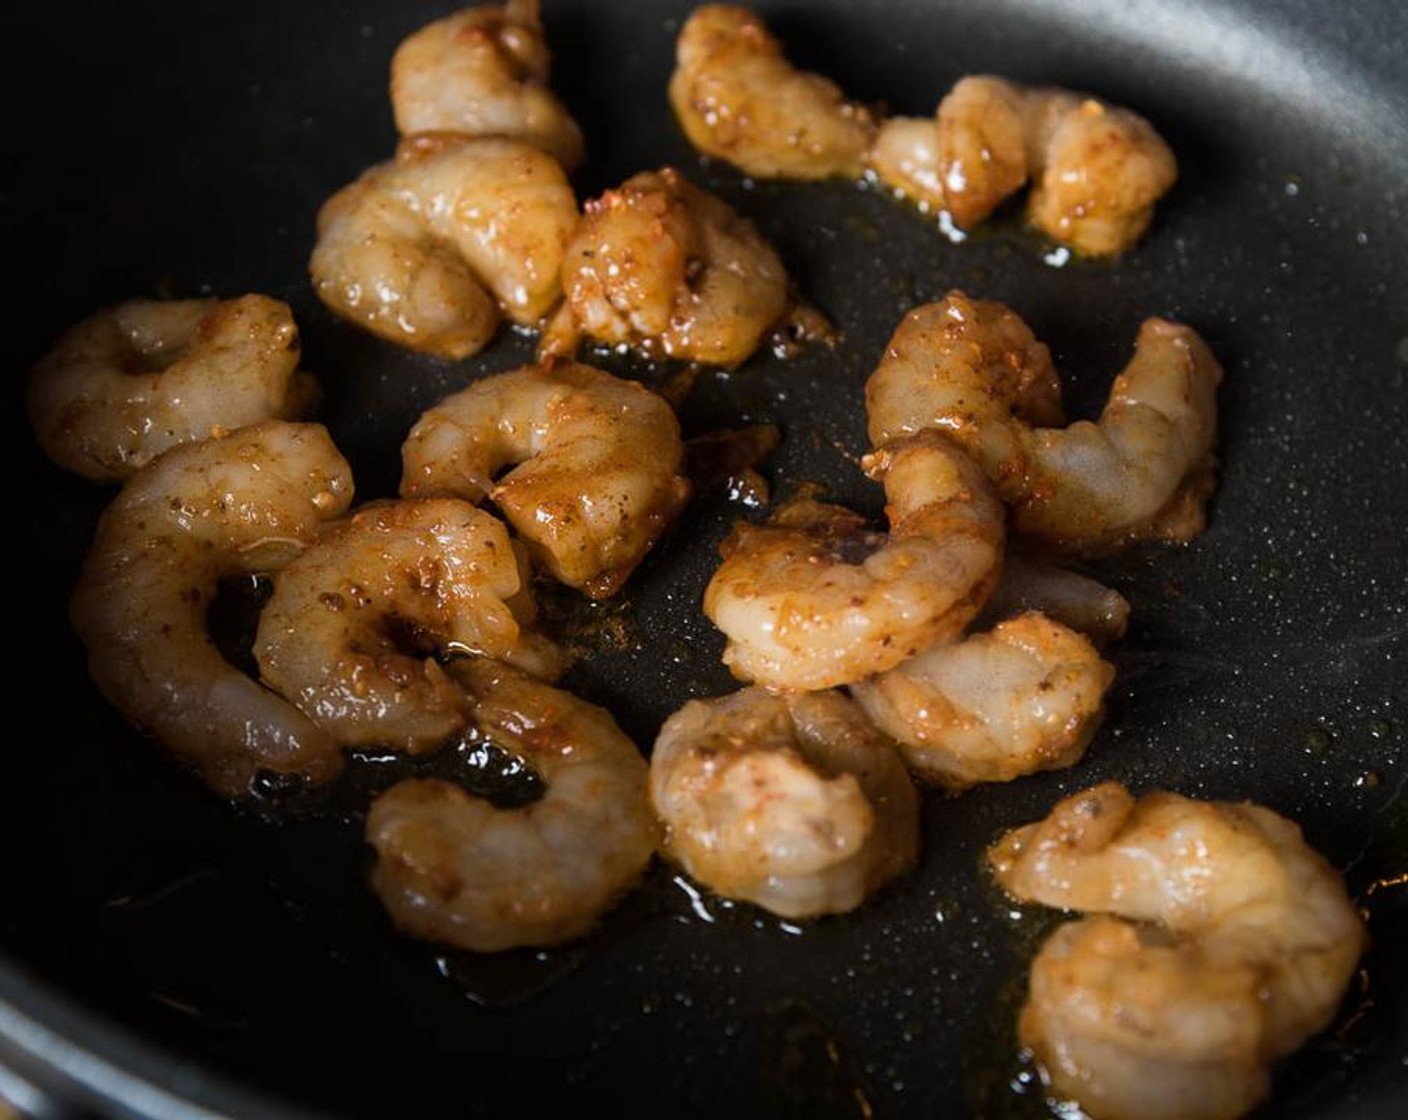 step 3 Heat Olive Oil (1 Tbsp) in a nonstick pan until hot. Add shrimp. Cook and occasionally stir, until the surface turns slightly golden and the shrimp have curled. Transfer to a plate immediately.